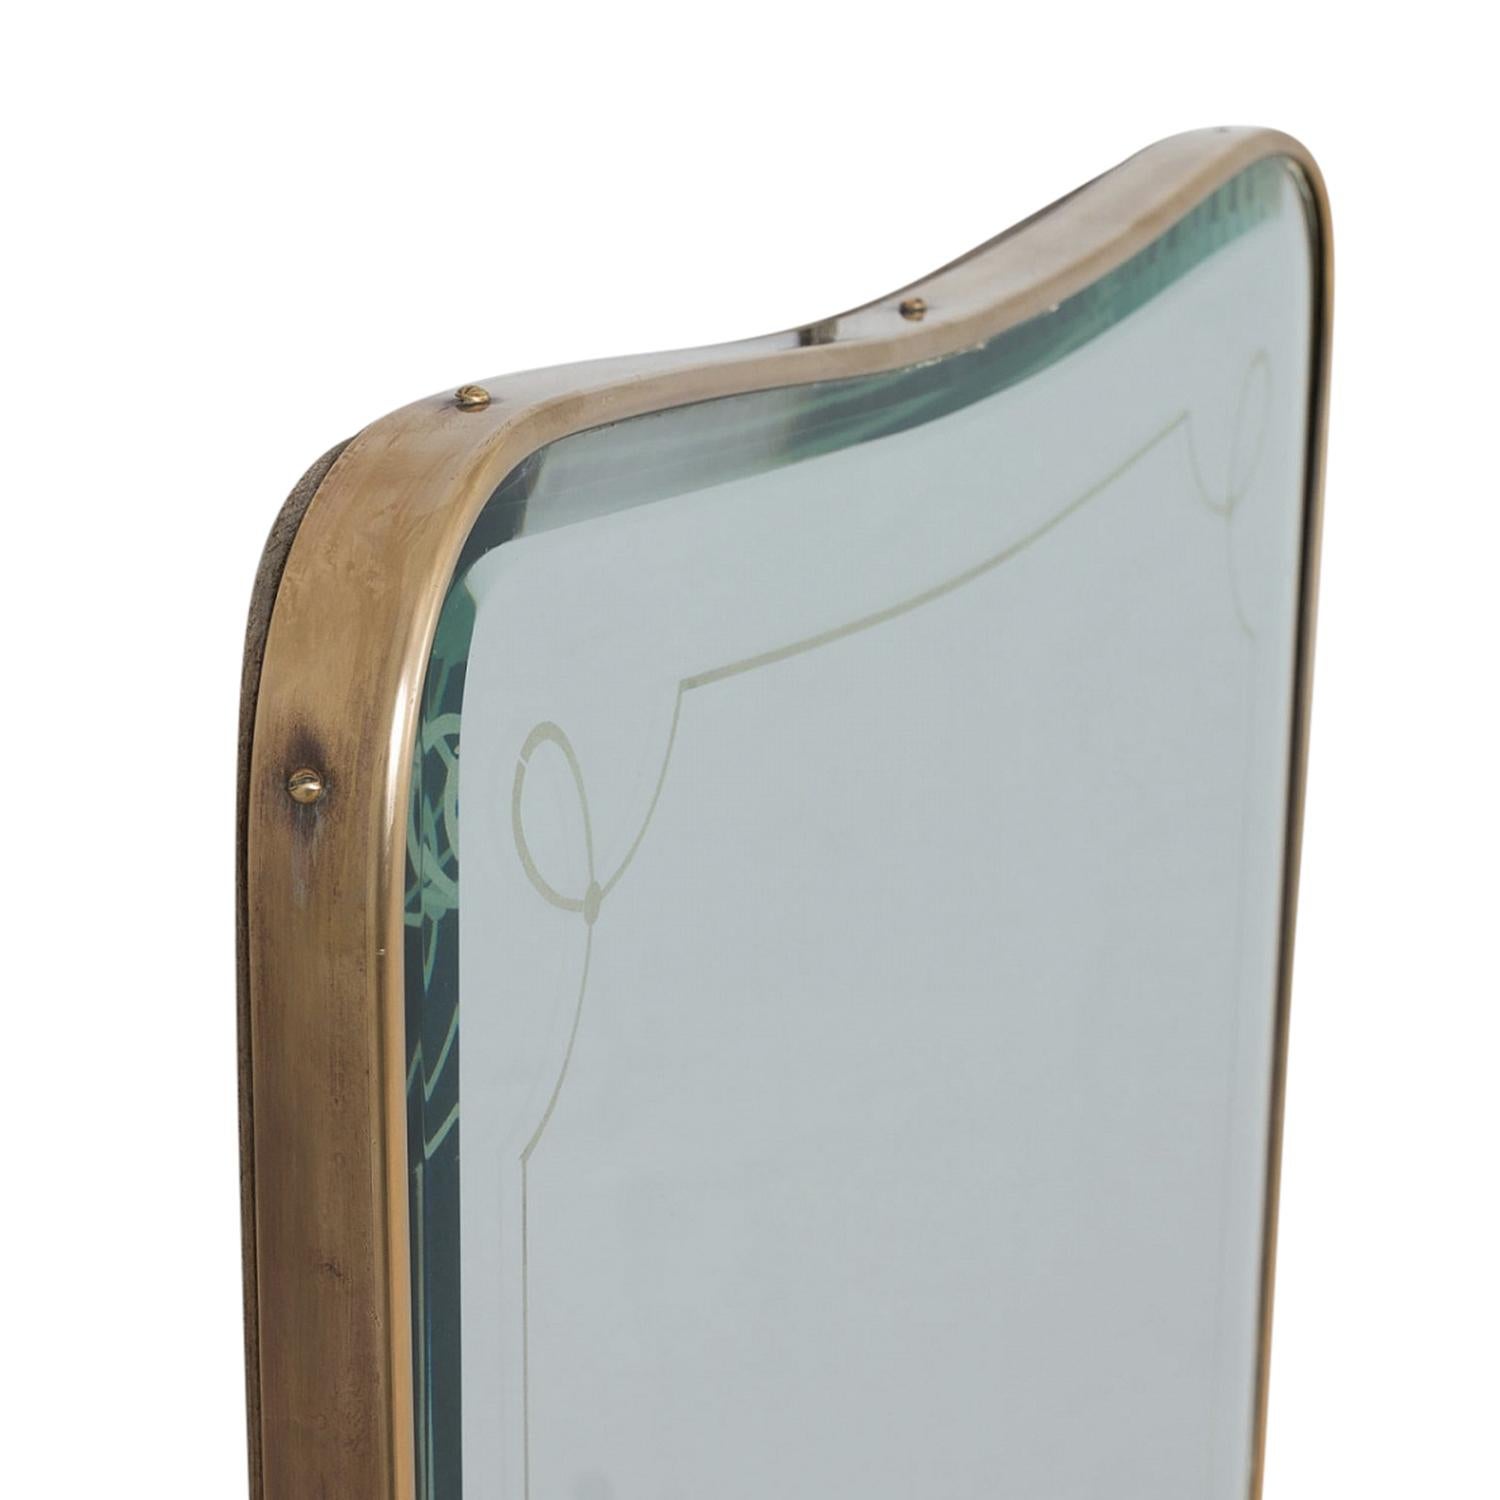 20th Century French Art Deco Asymmetrical Brass Wall Glass Mirror, Vintage Décor In Good Condition For Sale In West Palm Beach, FL